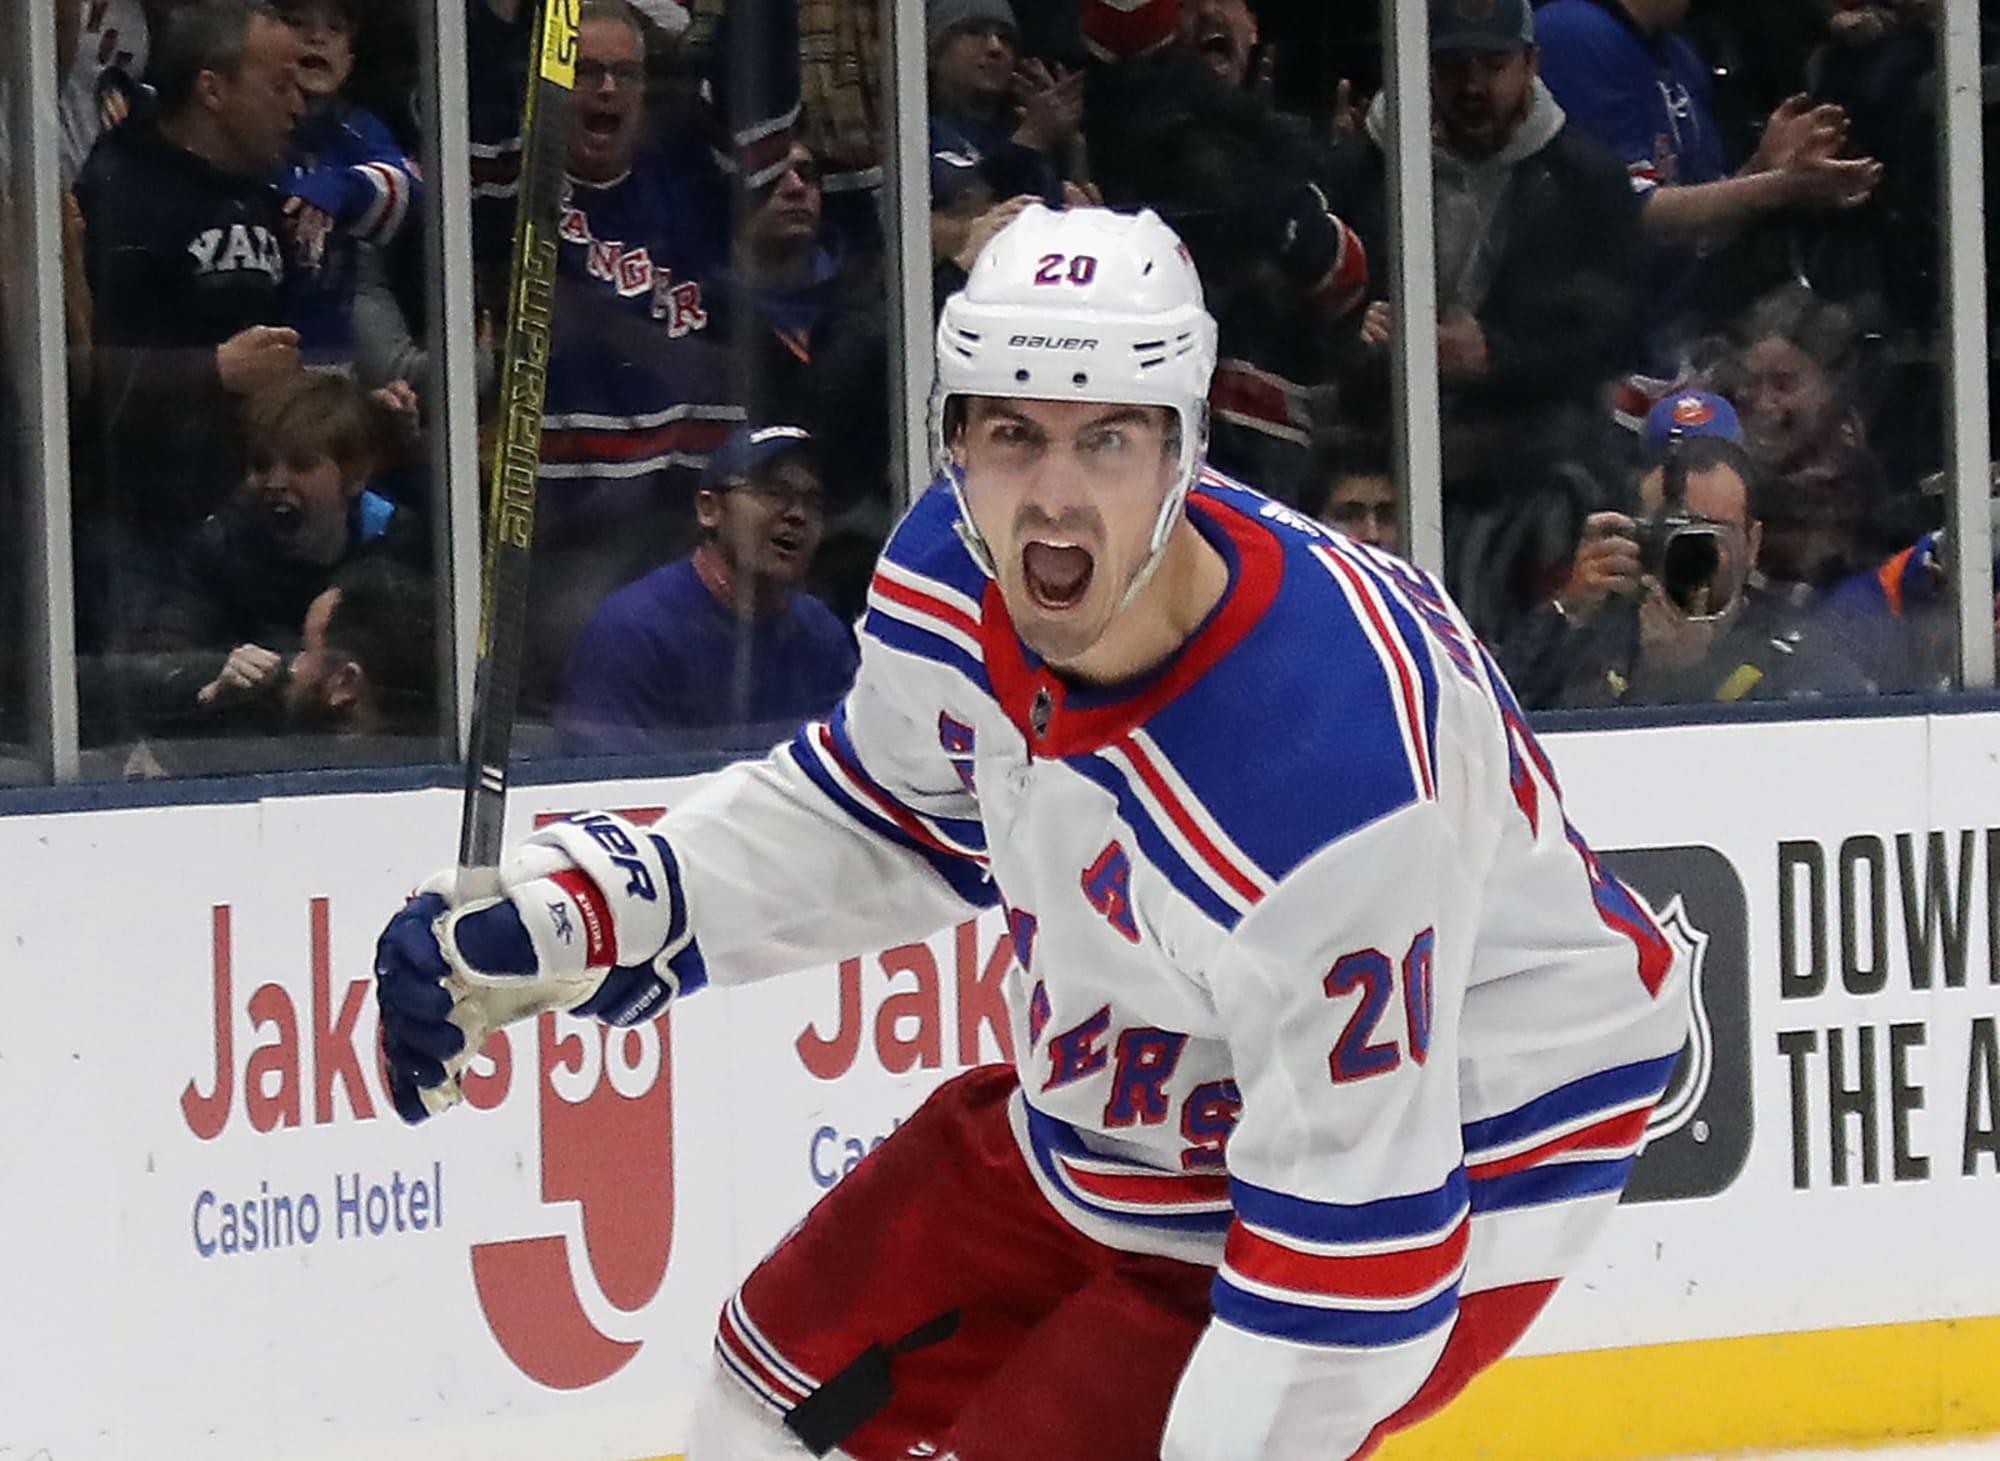 Chris Kreider of the Rangers Is Getting Better With Age - The New York Times